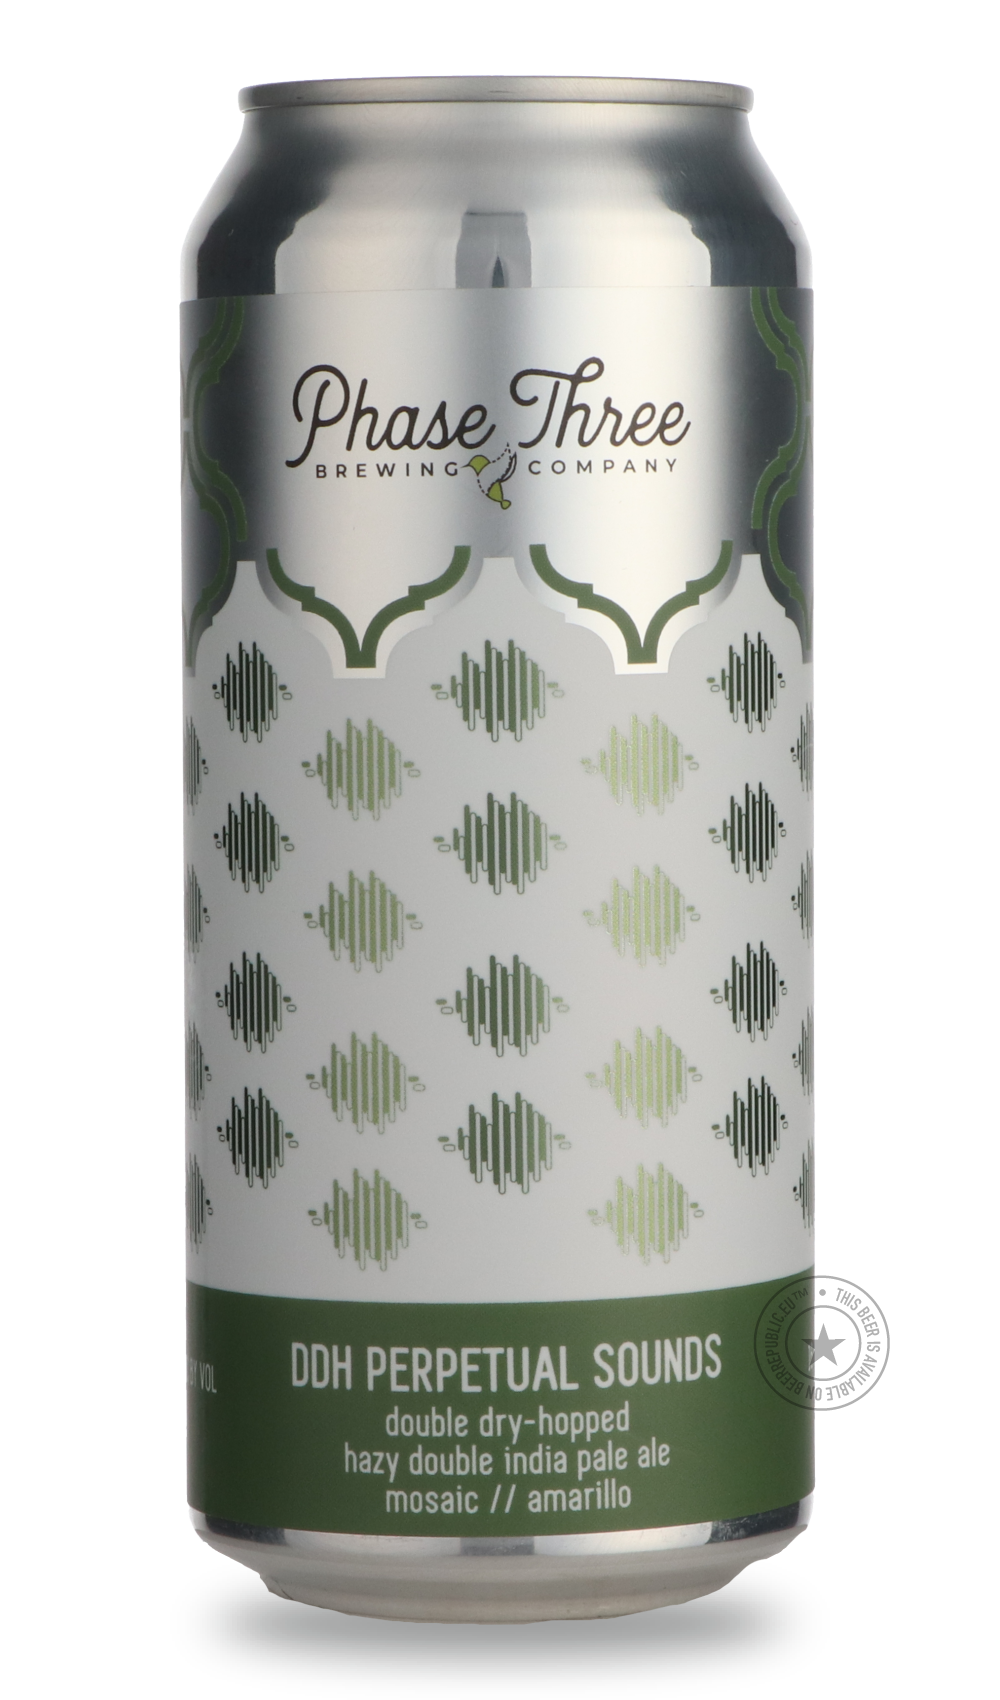 -Phase Three- DDH Perpetual Sounds-IPA- Only @ Beer Republic - The best online beer store for American & Canadian craft beer - Buy beer online from the USA and Canada - Bier online kopen - Amerikaans bier kopen - Craft beer store - Craft beer kopen - Amerikanisch bier kaufen - Bier online kaufen - Acheter biere online - IPA - Stout - Porter - New England IPA - Hazy IPA - Imperial Stout - Barrel Aged - Barrel Aged Imperial Stout - Brown - Dark beer - Blond - Blonde - Pilsner - Lager - Wheat - Weizen - Amber 